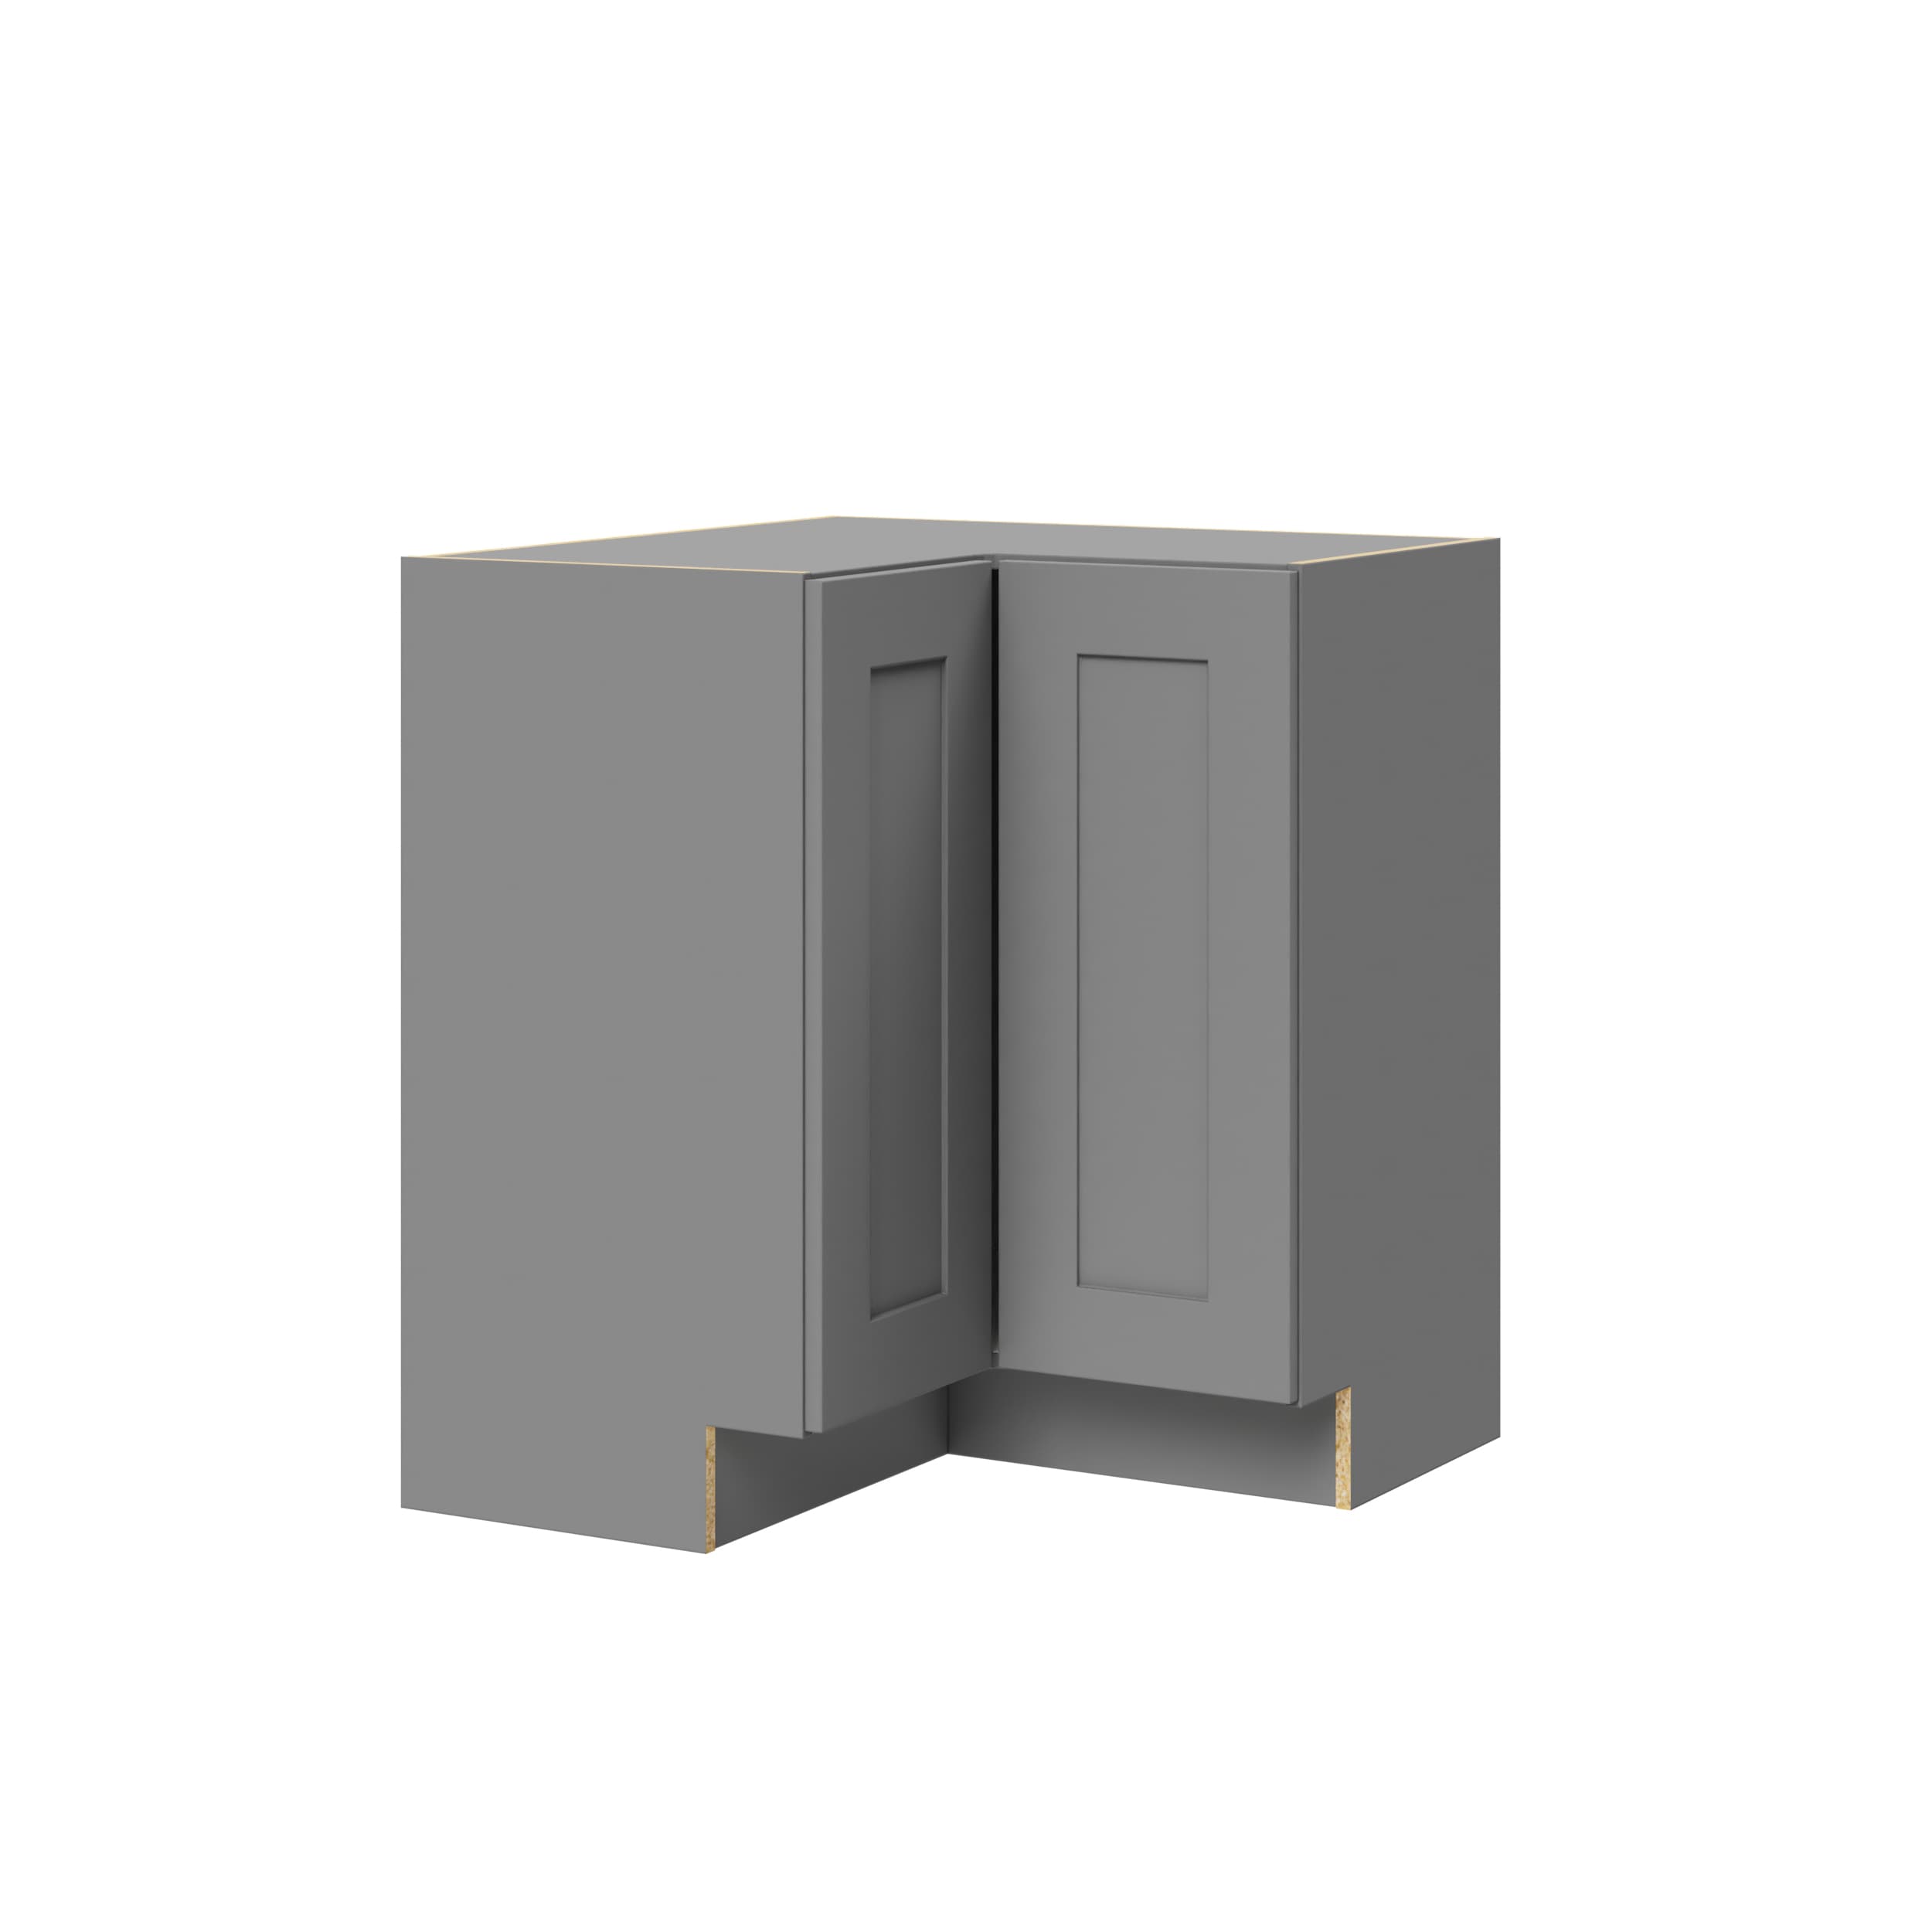 Panel Gray Laval x 30-in W Corner Hugo&Borg Assembled H Susan (Recessed Cabinet 30.8-in 34.5-in Style) Laval Base Door Fully x Lazy Shaker D at